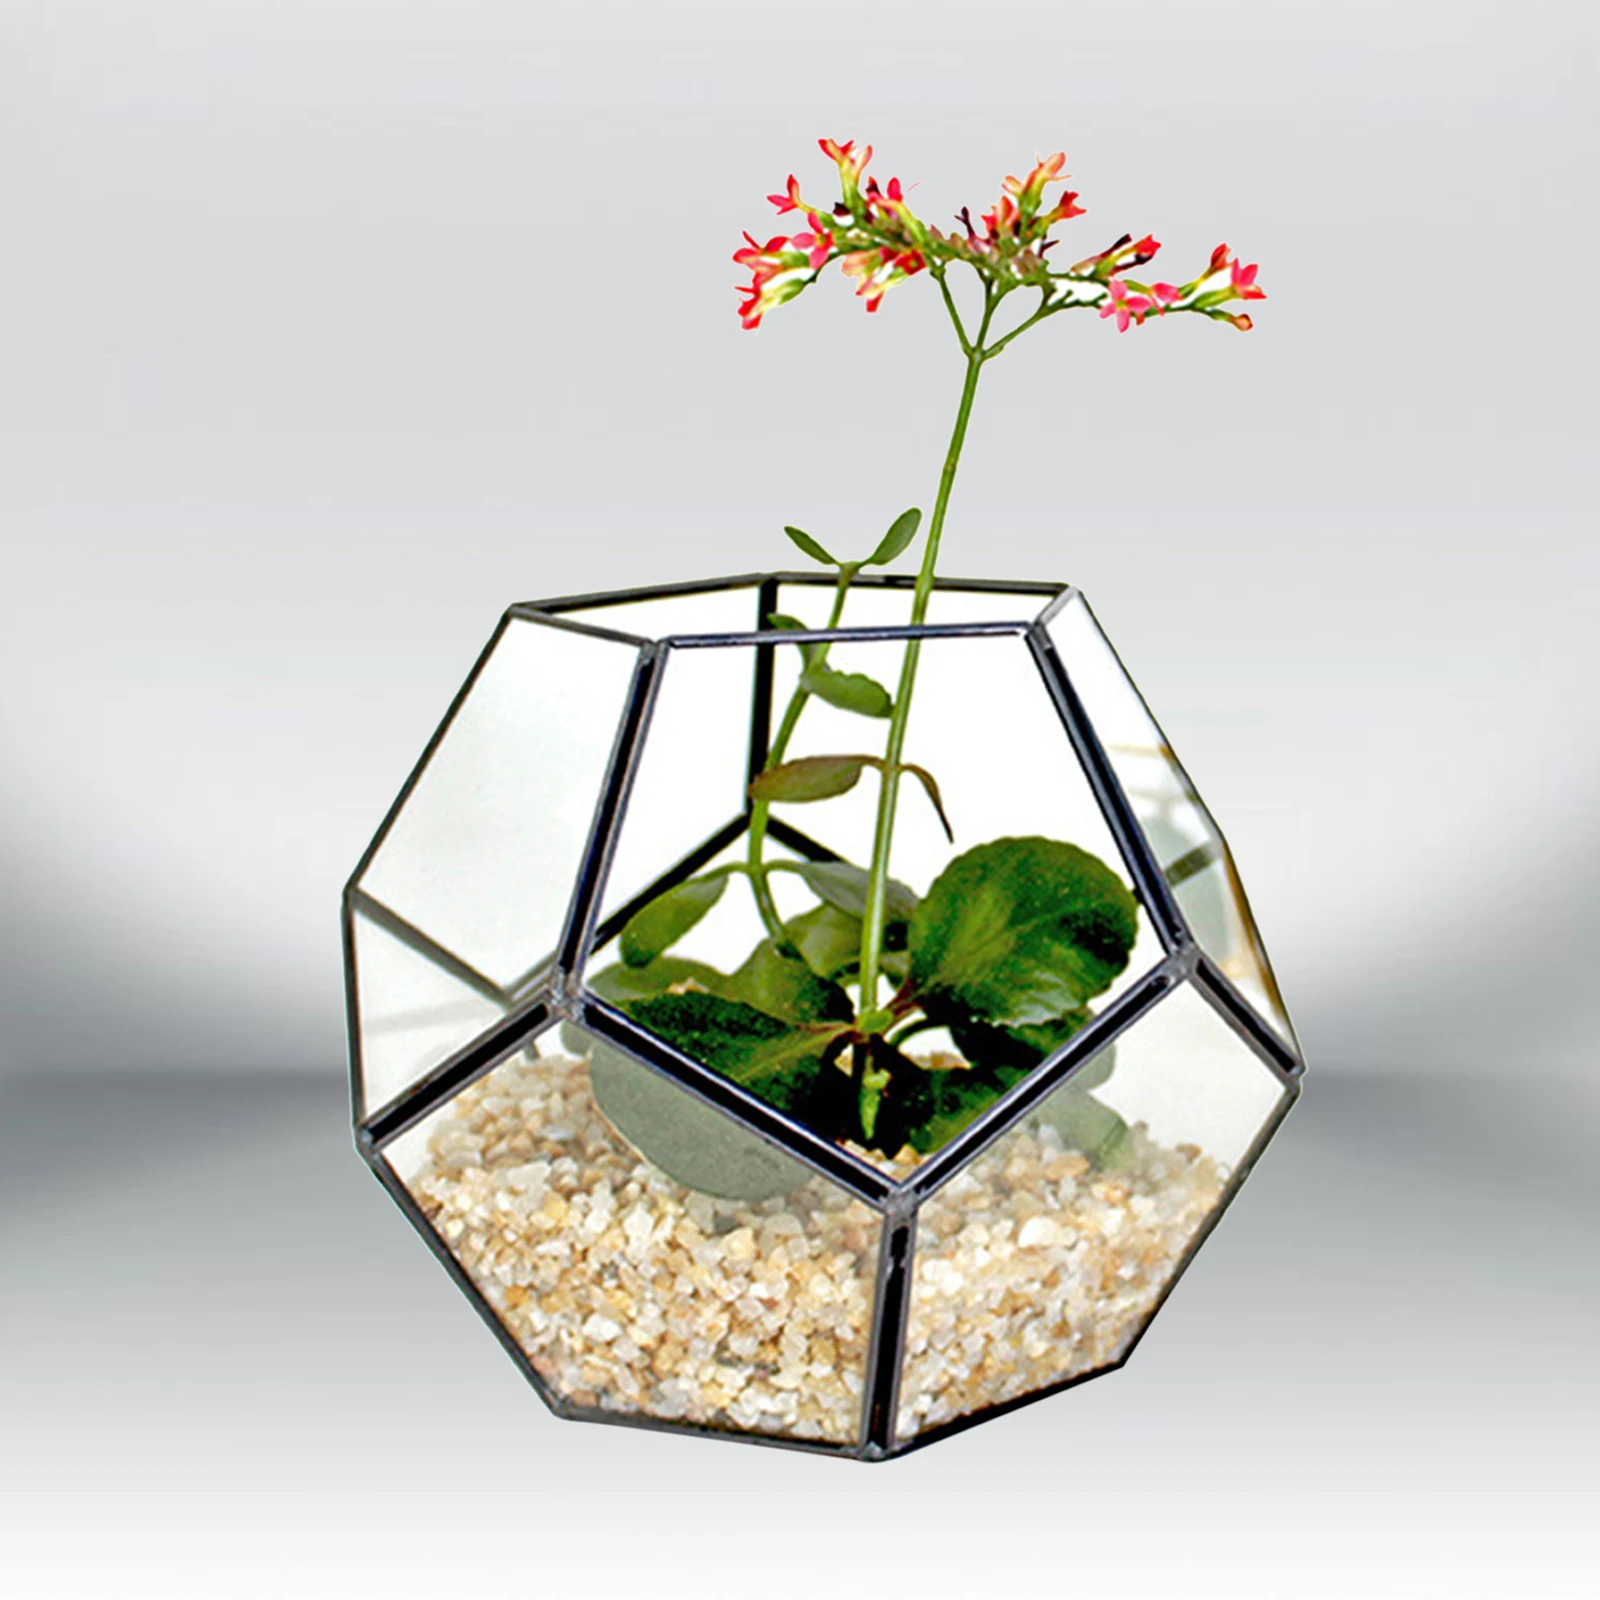 Geometric Terrarium Home Tabletop Decor Display Box for Family Friends Couples Schoolmate Gift